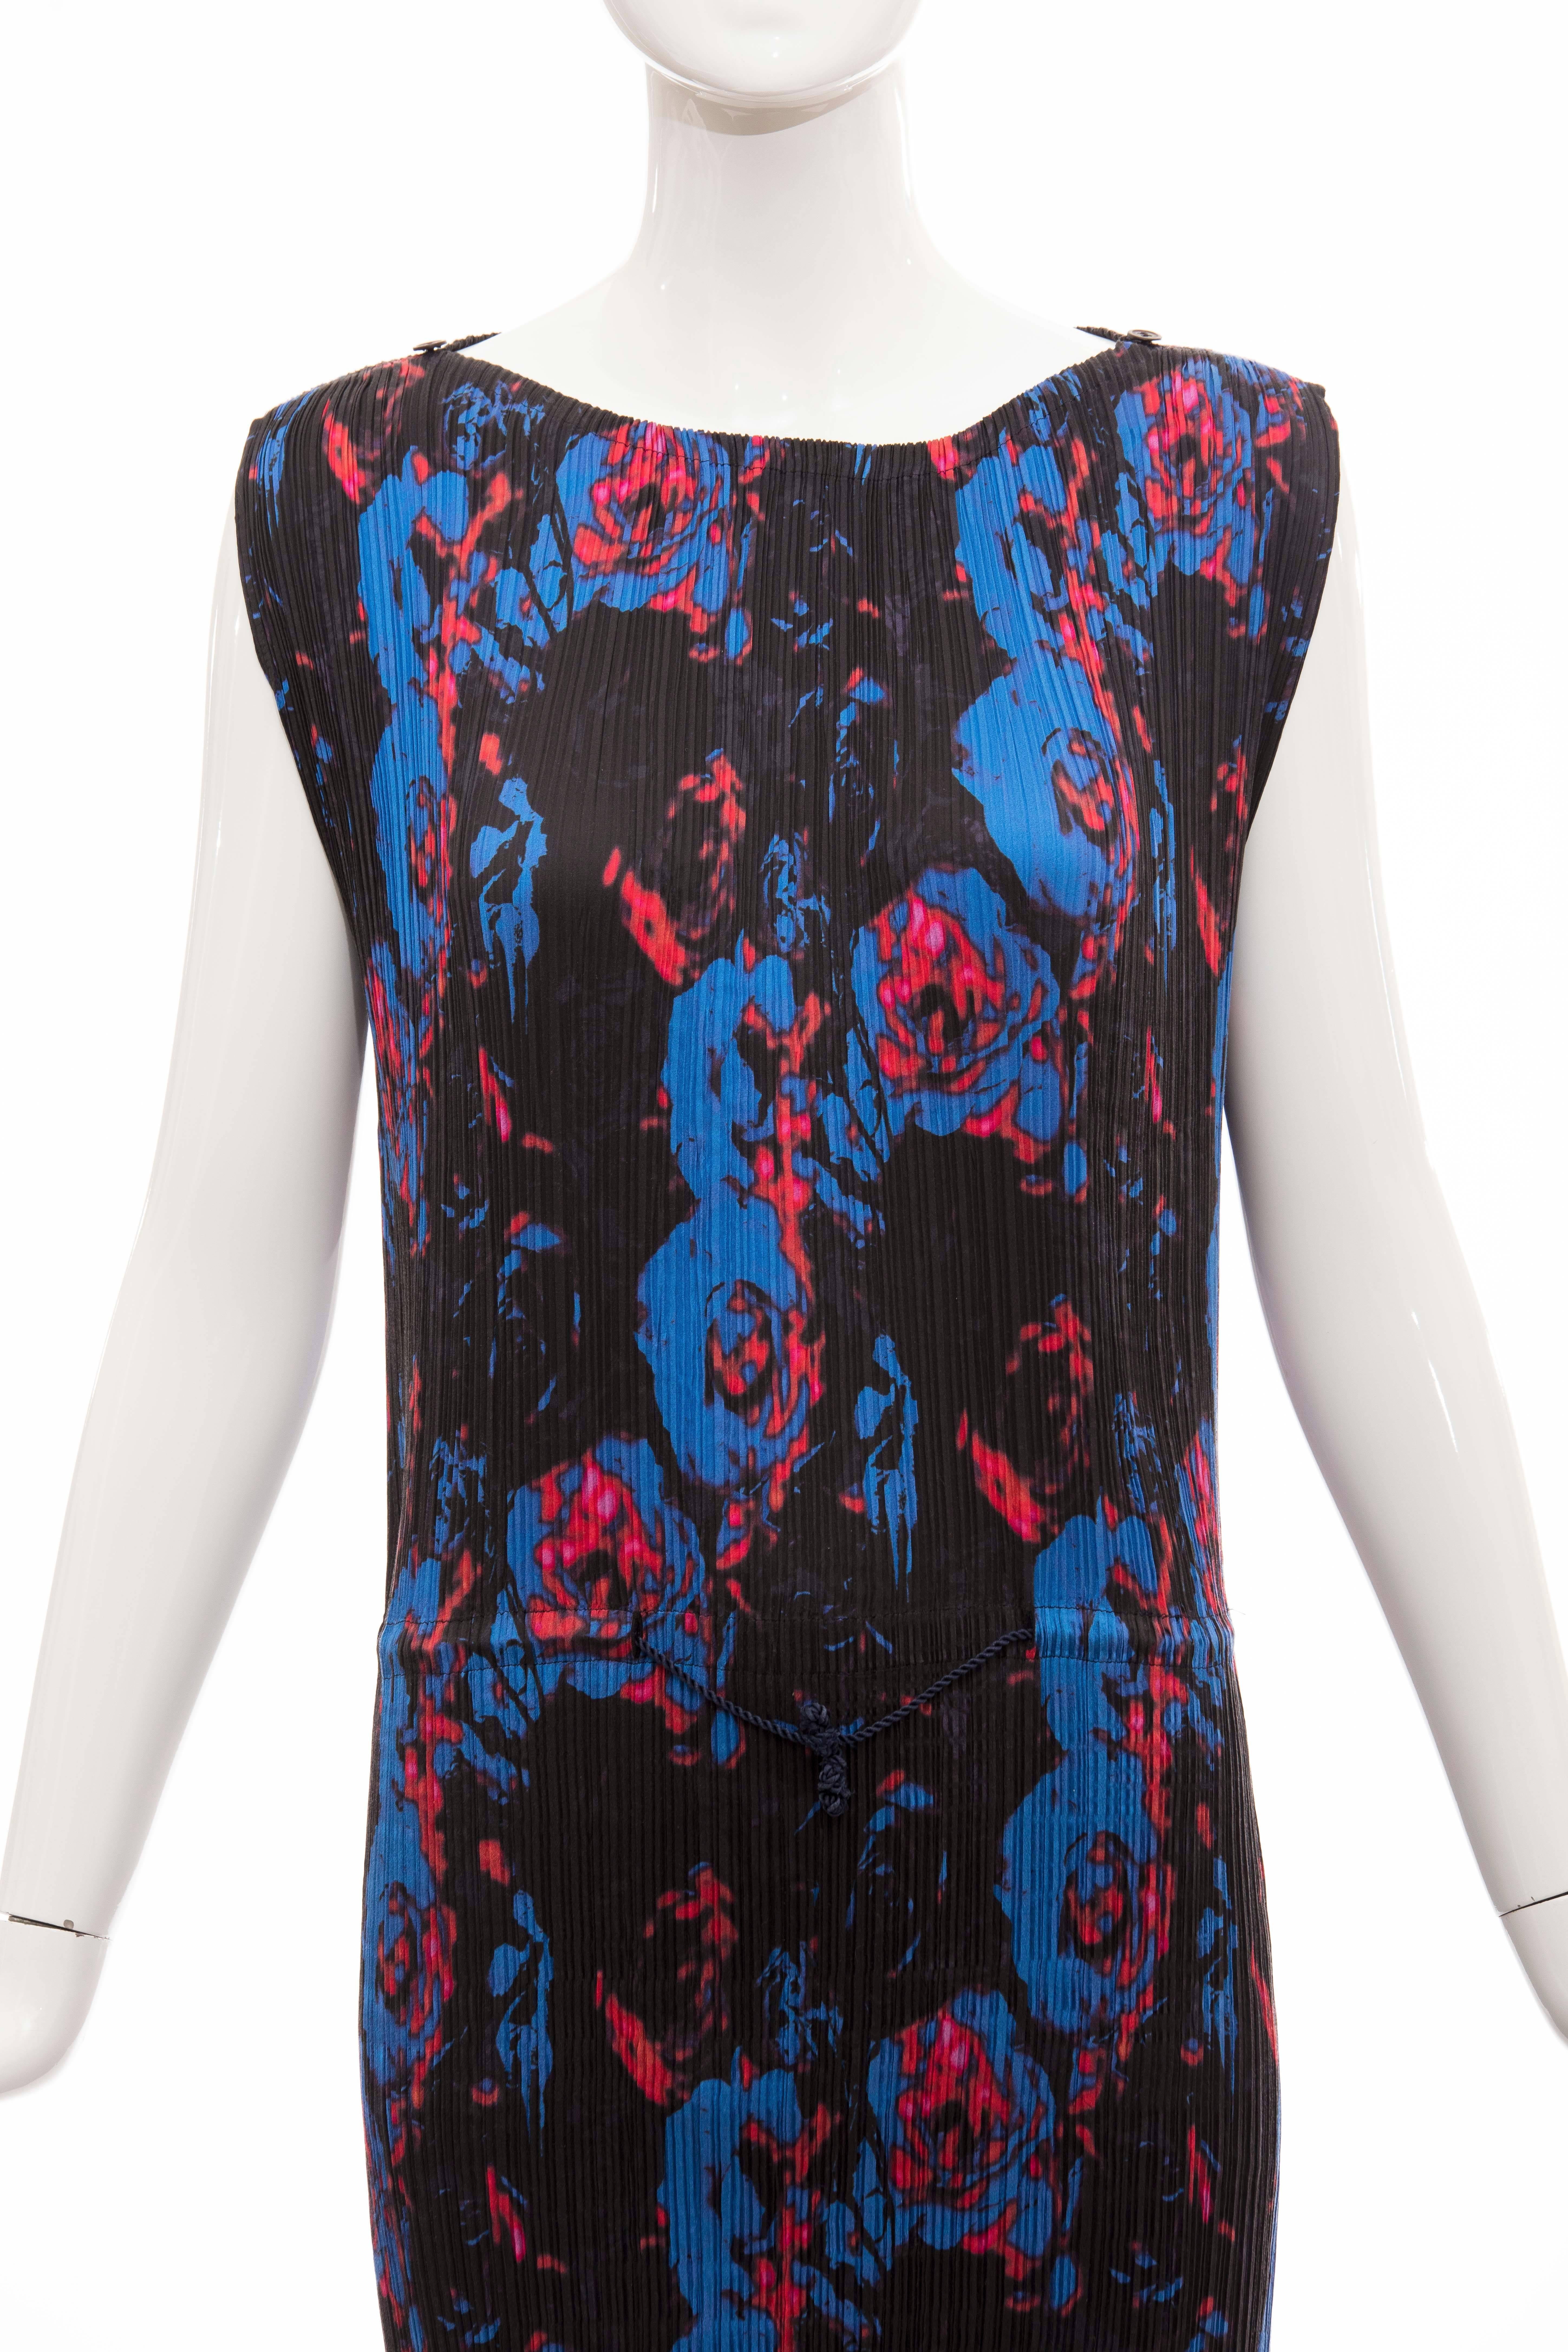 Issey Miyake Sleeveless Navy Blue Printed Silk Pleated Dress, Spring 2007 For Sale 1